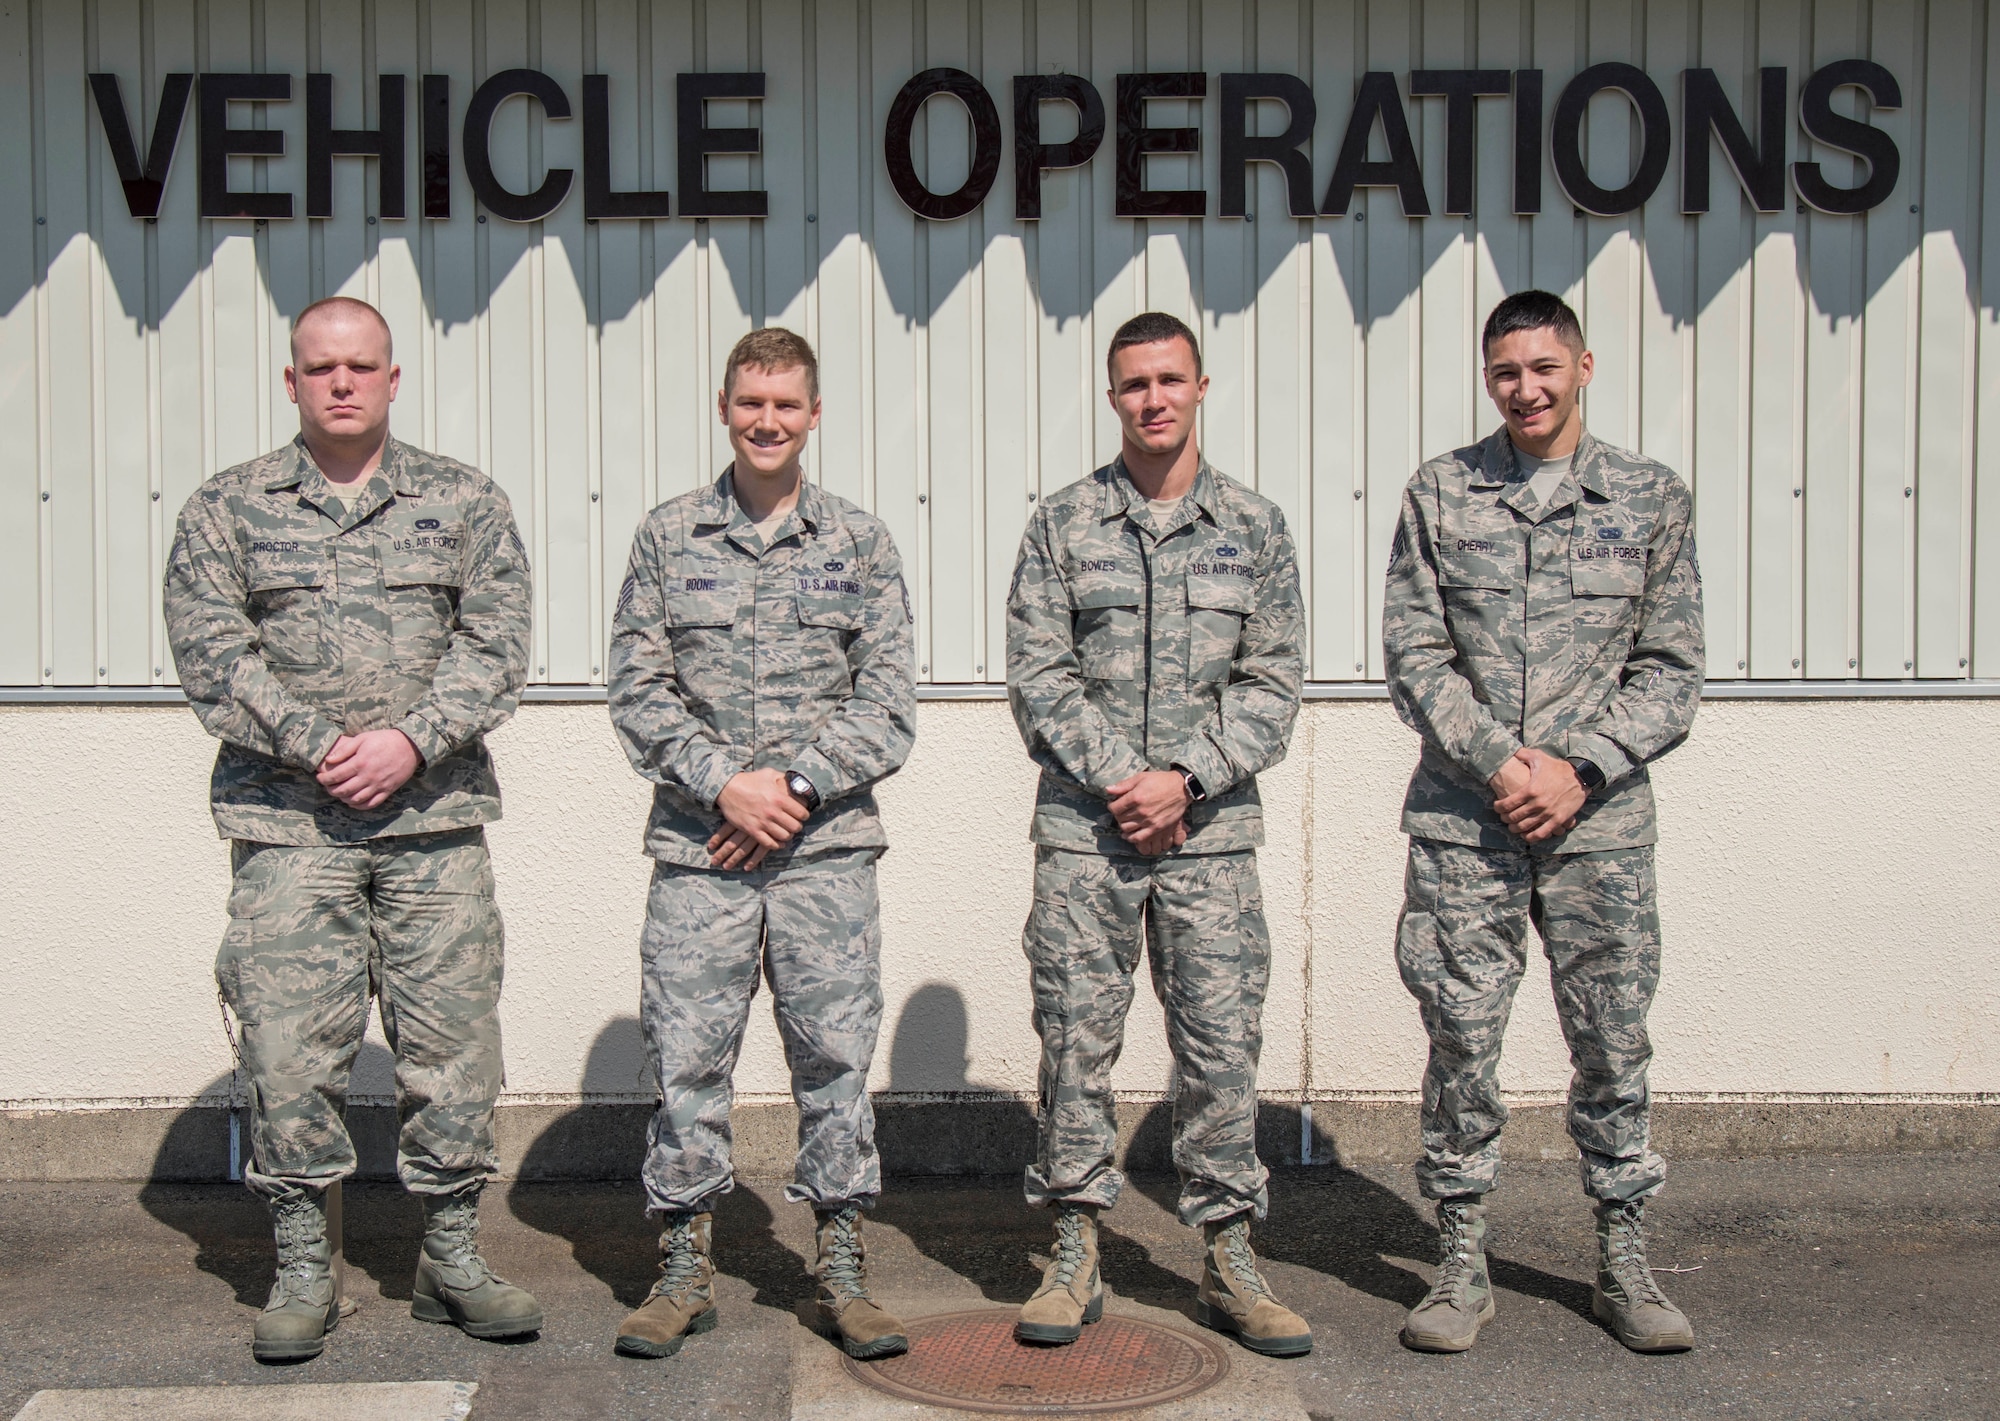 U.S. Air Force Airmen from the 35th Logistics Readiness Squadron pose for a photo at Misawa Air Base, Japan, April 25, 2017. The 35th LRS personnel pictured from left to right, Senior Airman John Proctor, Staff Sgts Scot Boone, Brent Bowes and Kyle Cherry,all vehicle operator dispatchers, and Tech. Sgt. Canaan Hatcher, not pictured, a quality assurance evaluator, rescued a Thai man Febuary 19, 2017 who was stuck upside down in snow at Niseko Mountain, Japan. (U.S. Air Force photo by Senior Airman Brittany A. Chase)